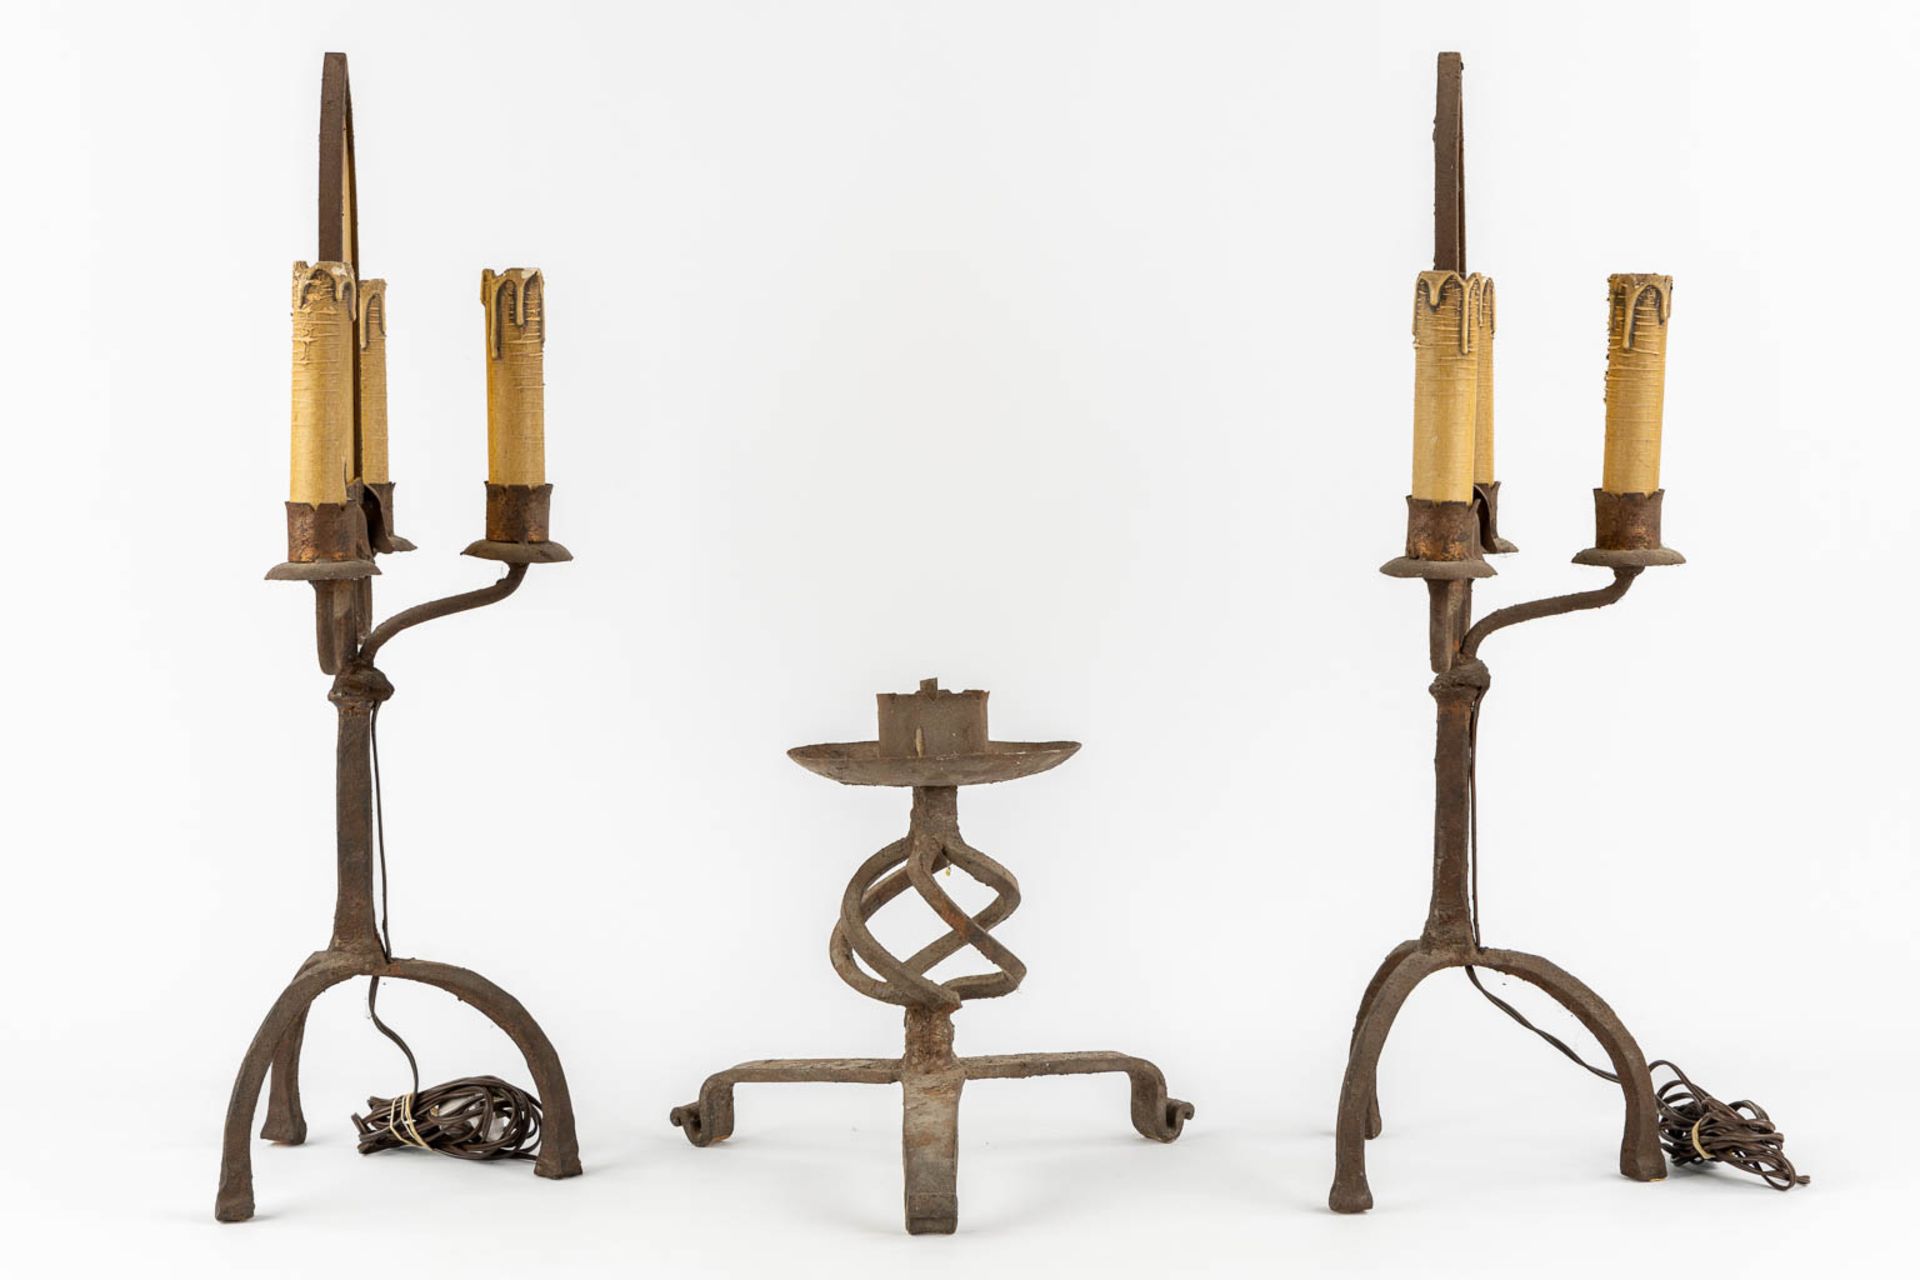 A pair of wrought iron table lamps in a Gothic Revival style. Added a candlestick. (H:63 cm) - Image 6 of 9